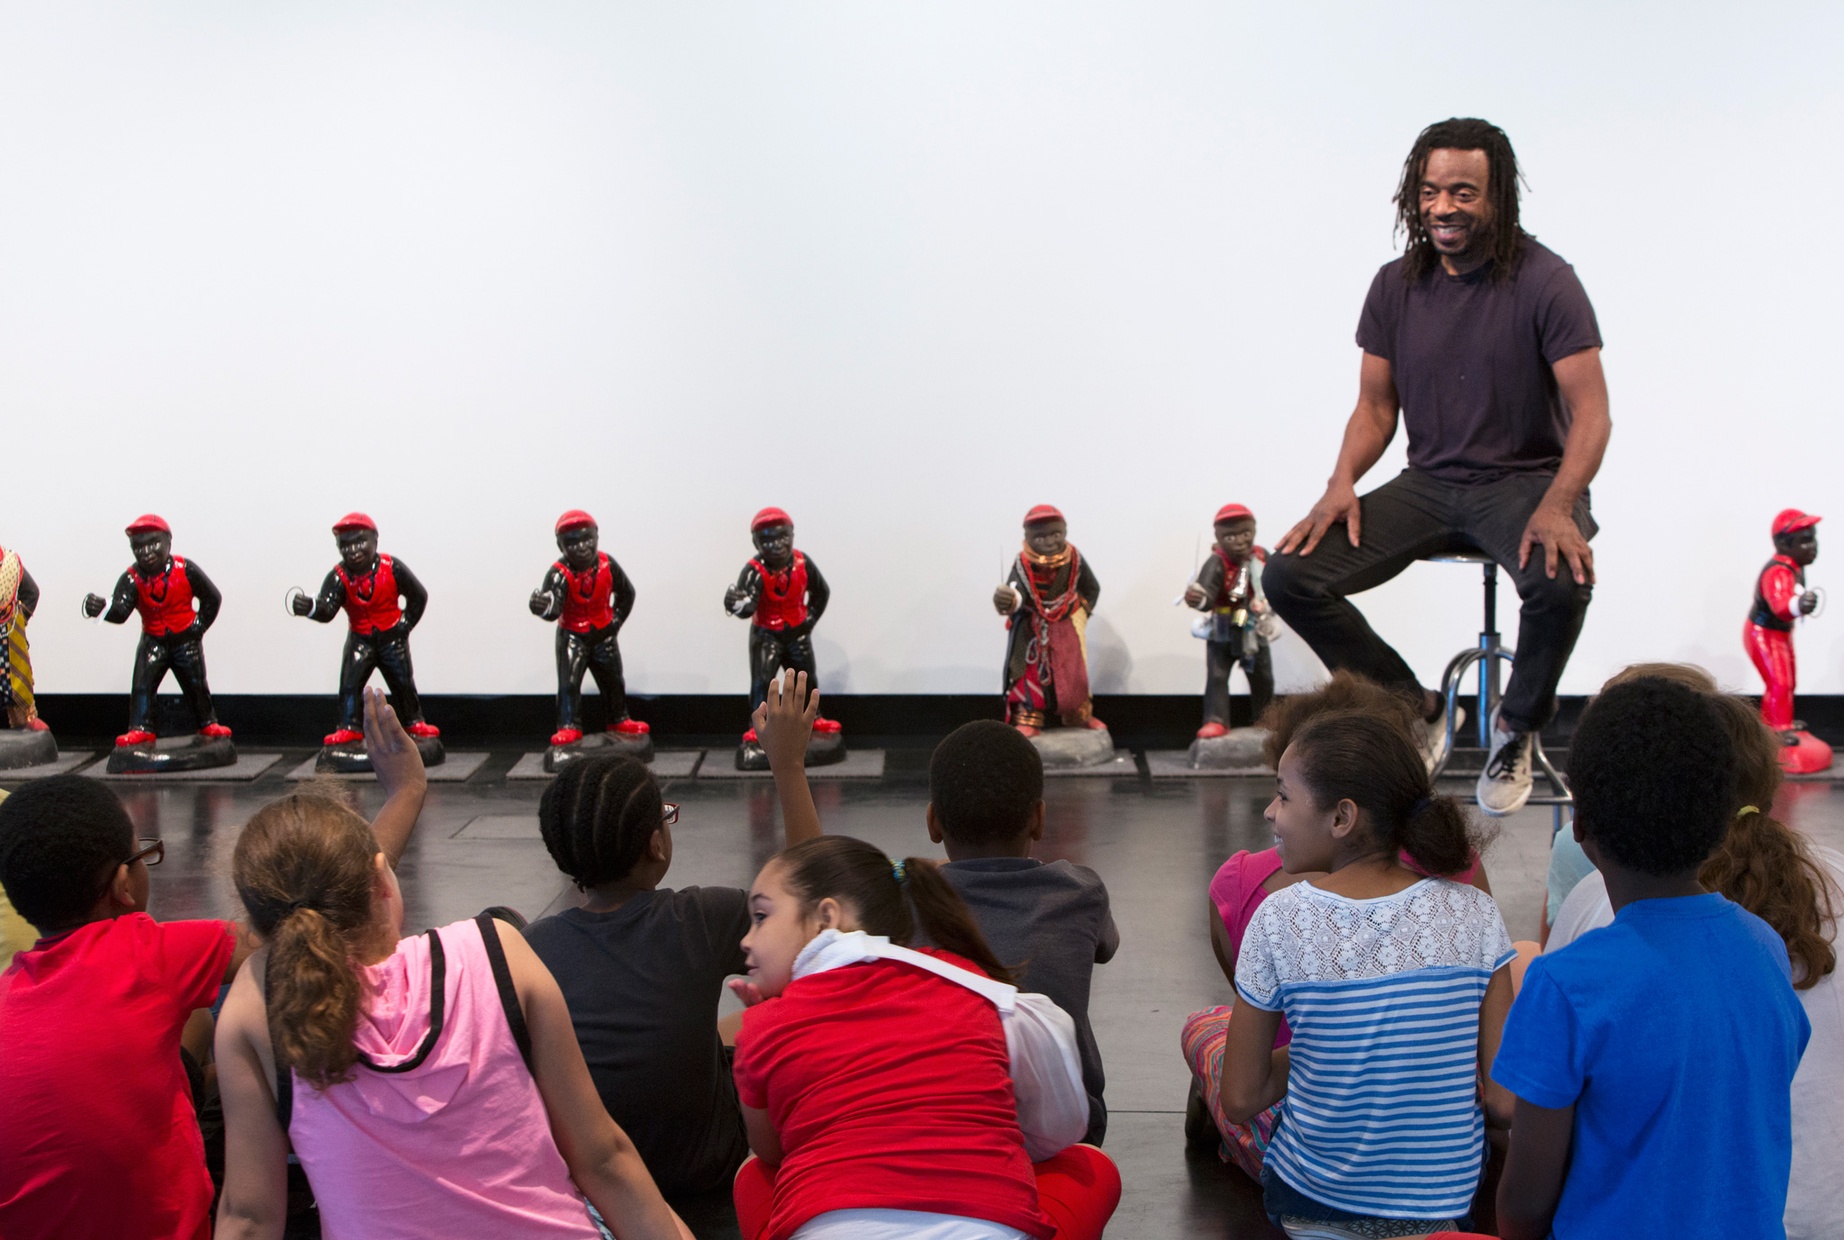 A middle-aged, black man sits, smiling, facing a group of children sitting on a dark floor. A row of painted lawn jockeys are displayed behind the man against a white wall.